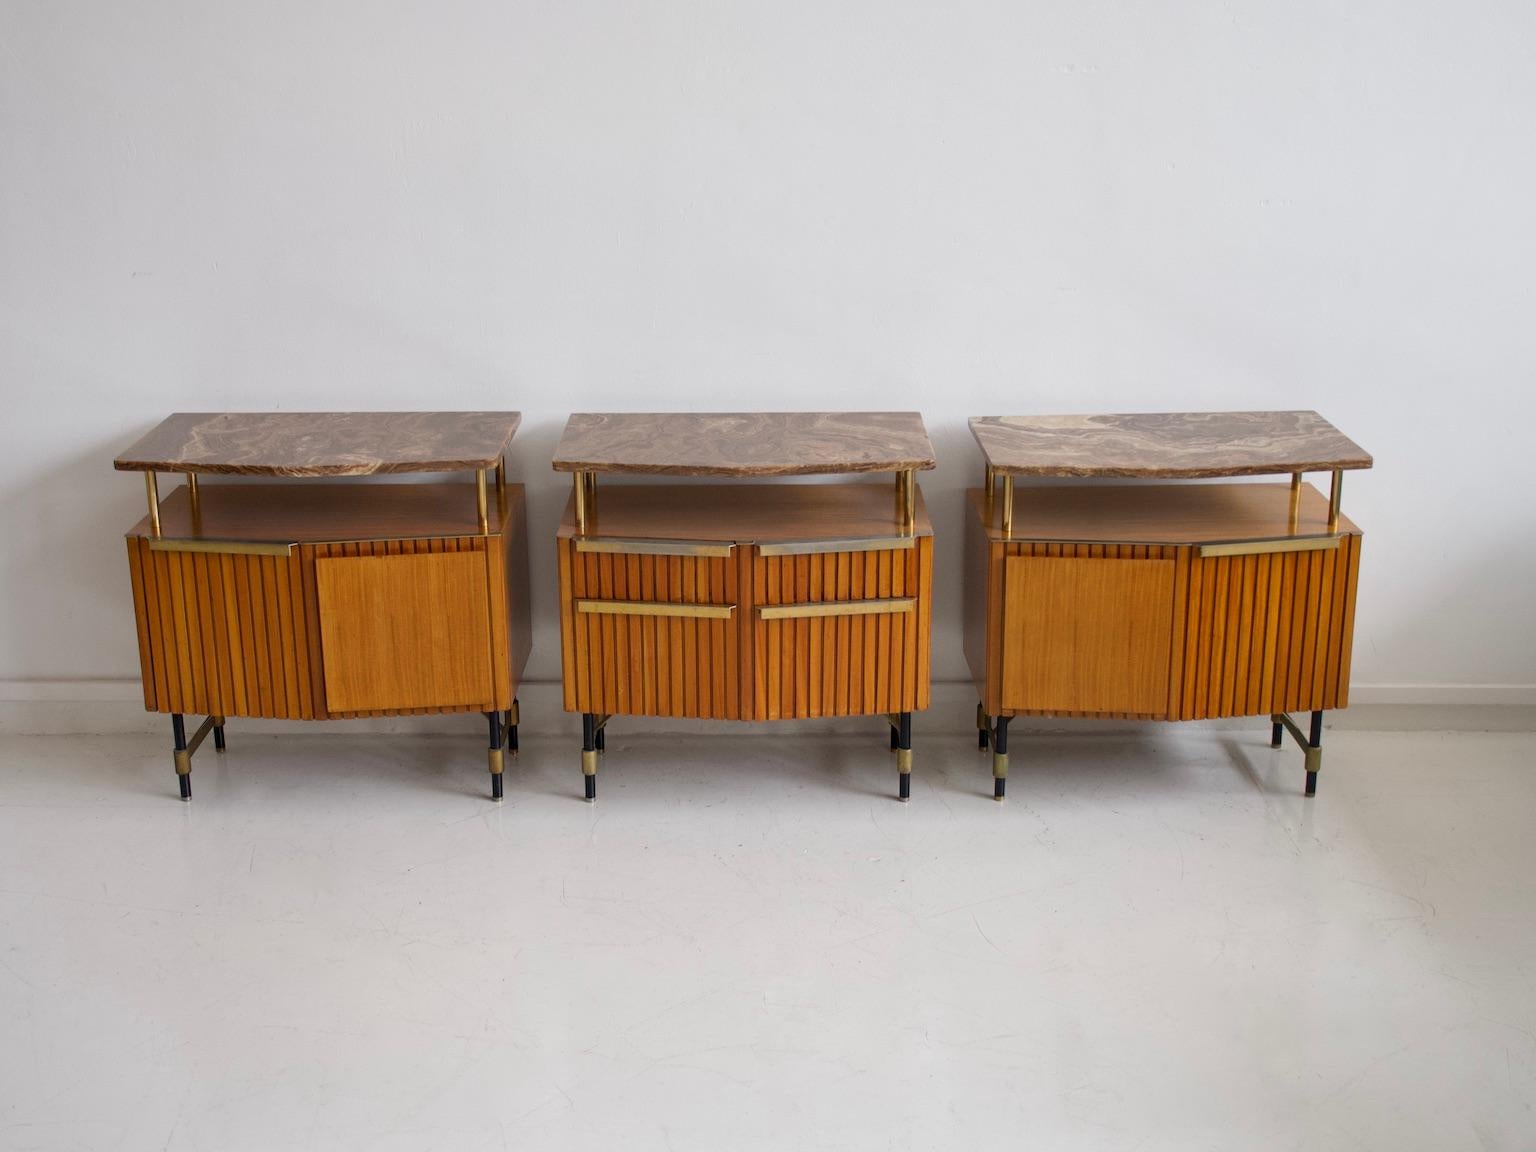 Three sideboard or console tables made in Italy in the 1950s. Featuring wooden structure with brass and lacquered metal details and a marble top. Two credenzas with doors, behind which are shelves and one with two drawers and flap doors.